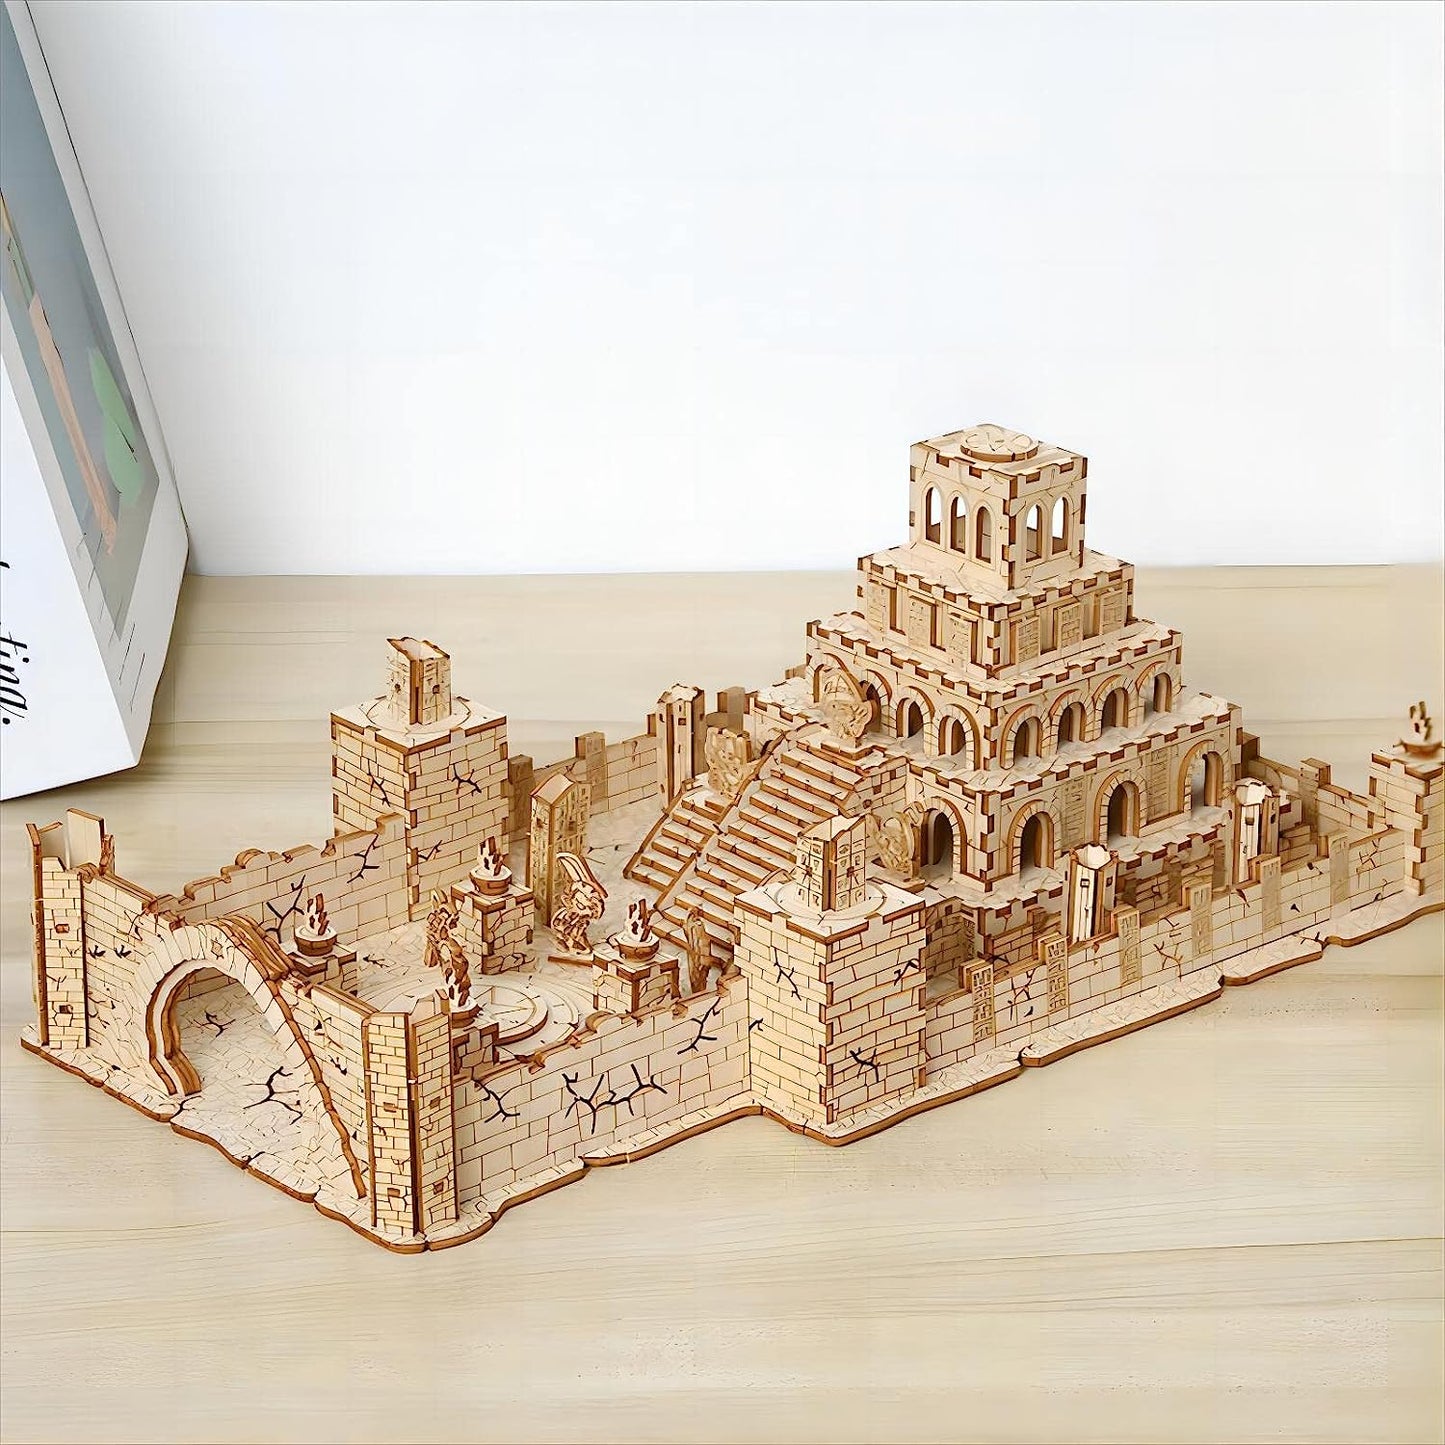 3D Wooden Puzzles The Ruins of The Ancient Temple Model Kits, Brainteaser and Puzzle for Chris as/Birthday,Gifts for Adults and Teens to Build Combination